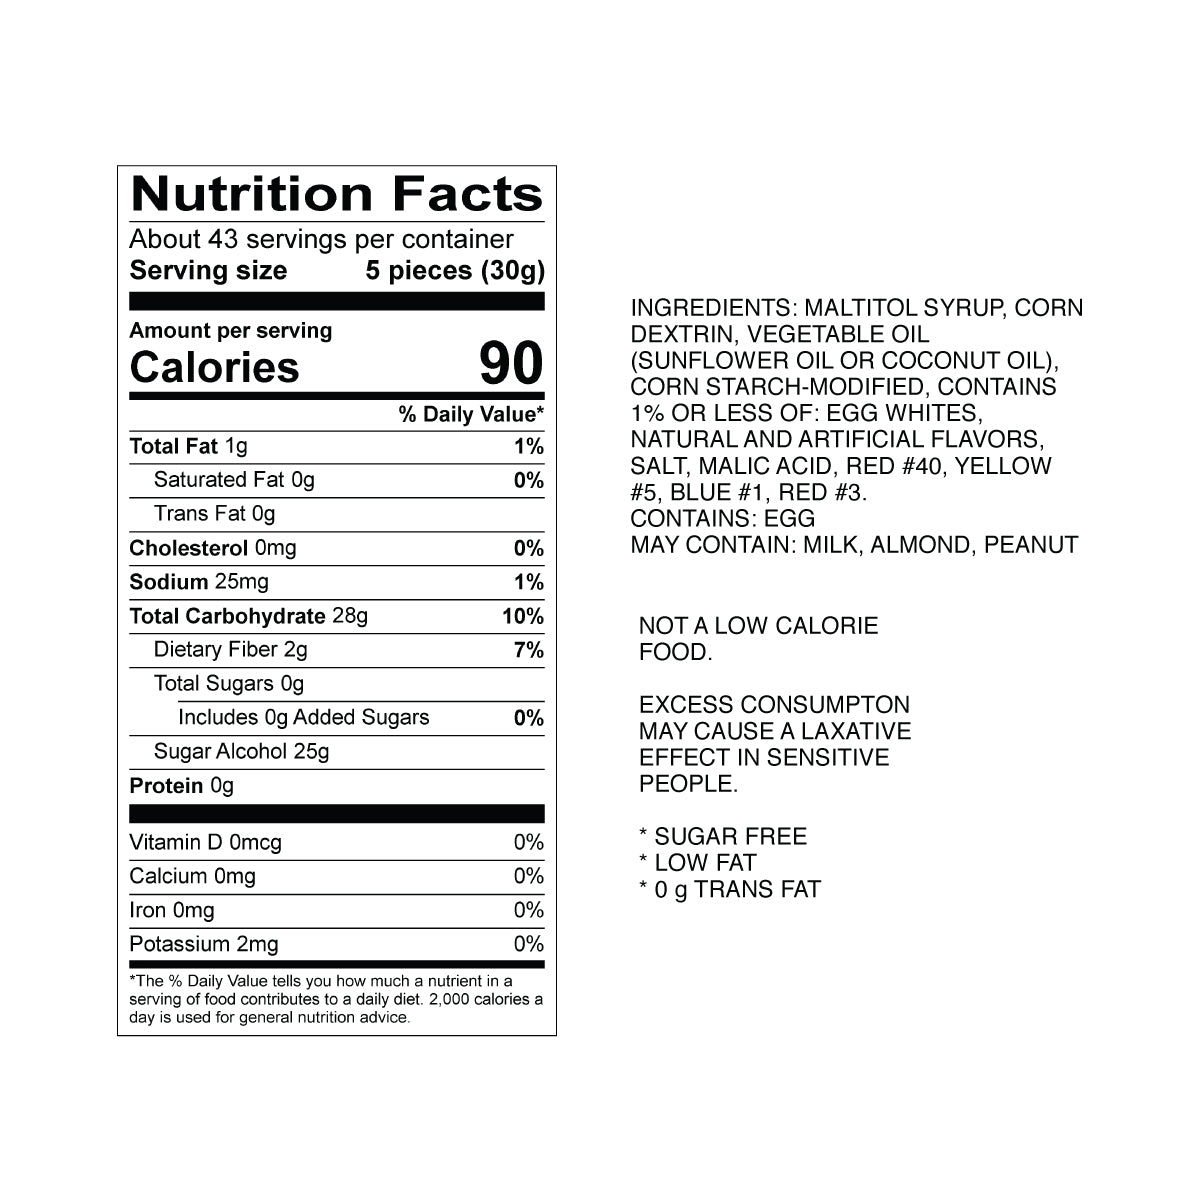 Sweet's Sugar Free Taffy, Assorted Nutrition Fact Panel & Ingredients for the NET WT 2.82LB (1.28kg) Bulk Bag